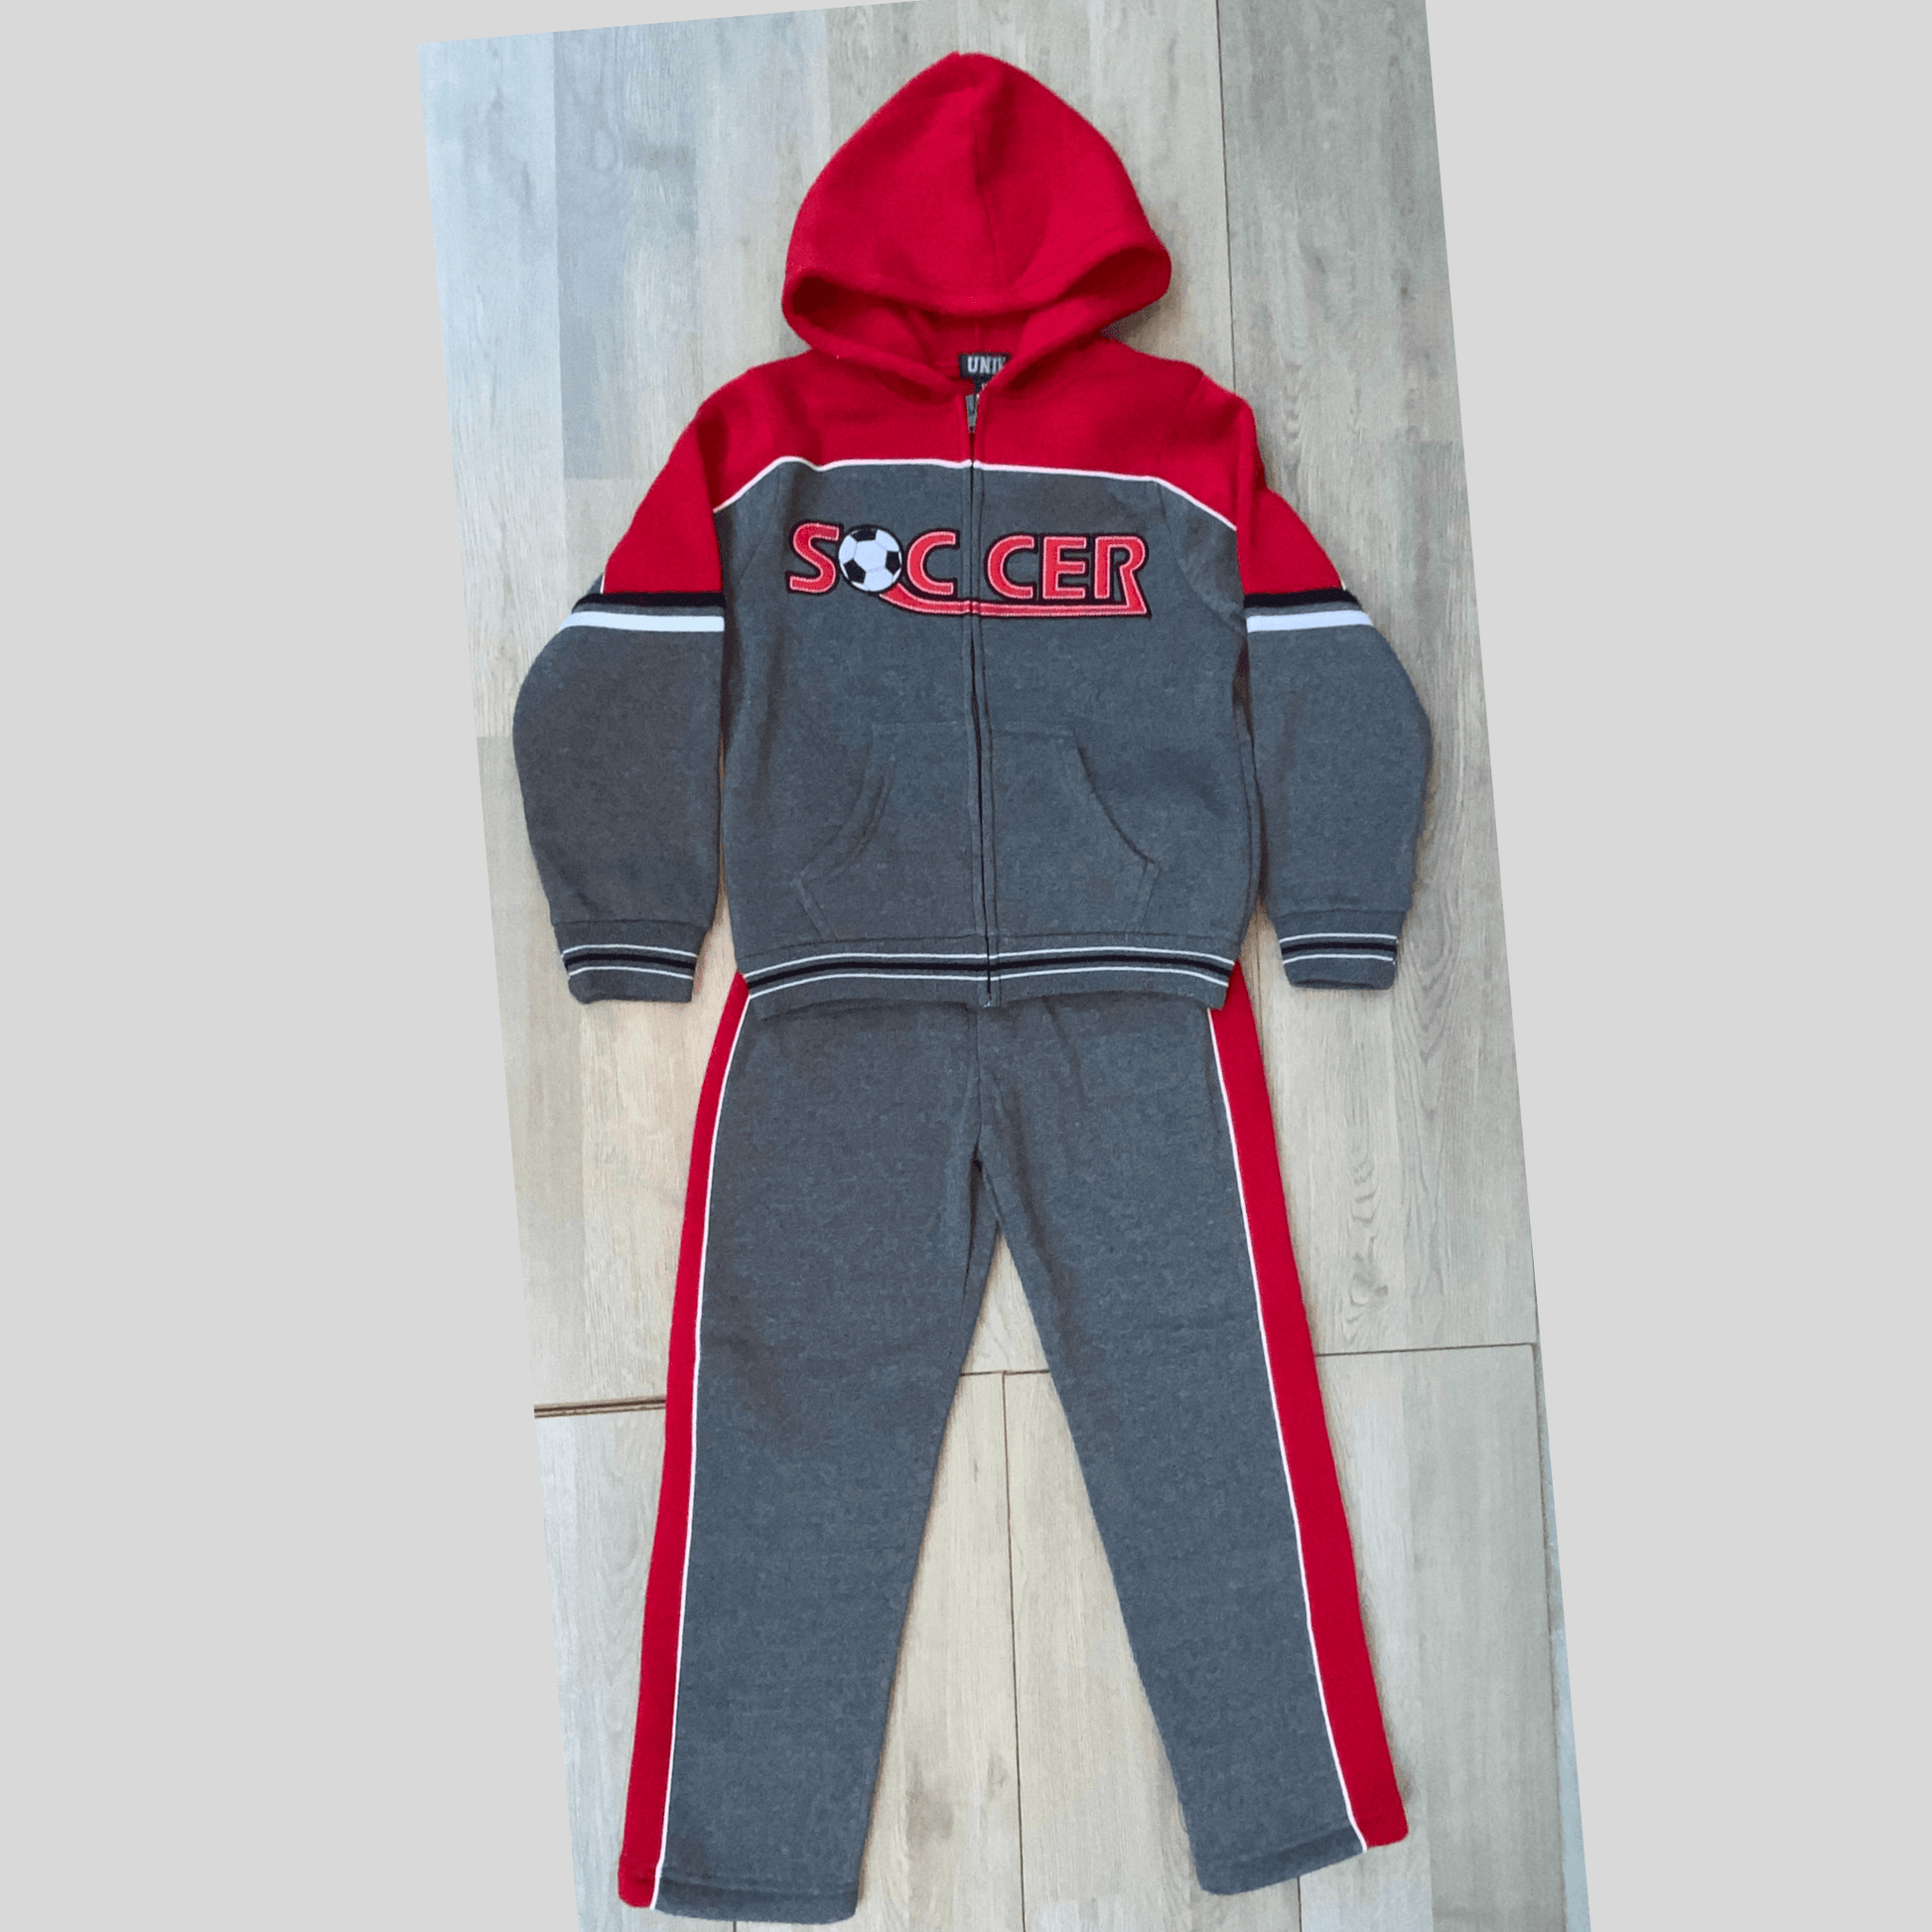 This dark grey soccer fleece set is perfect for your little soccer fans.  This sweat suit features thick red stripes down the side of the legs and the word "Soccer" embroidered on the front of the hoodie with a soccer ball for the letter o.